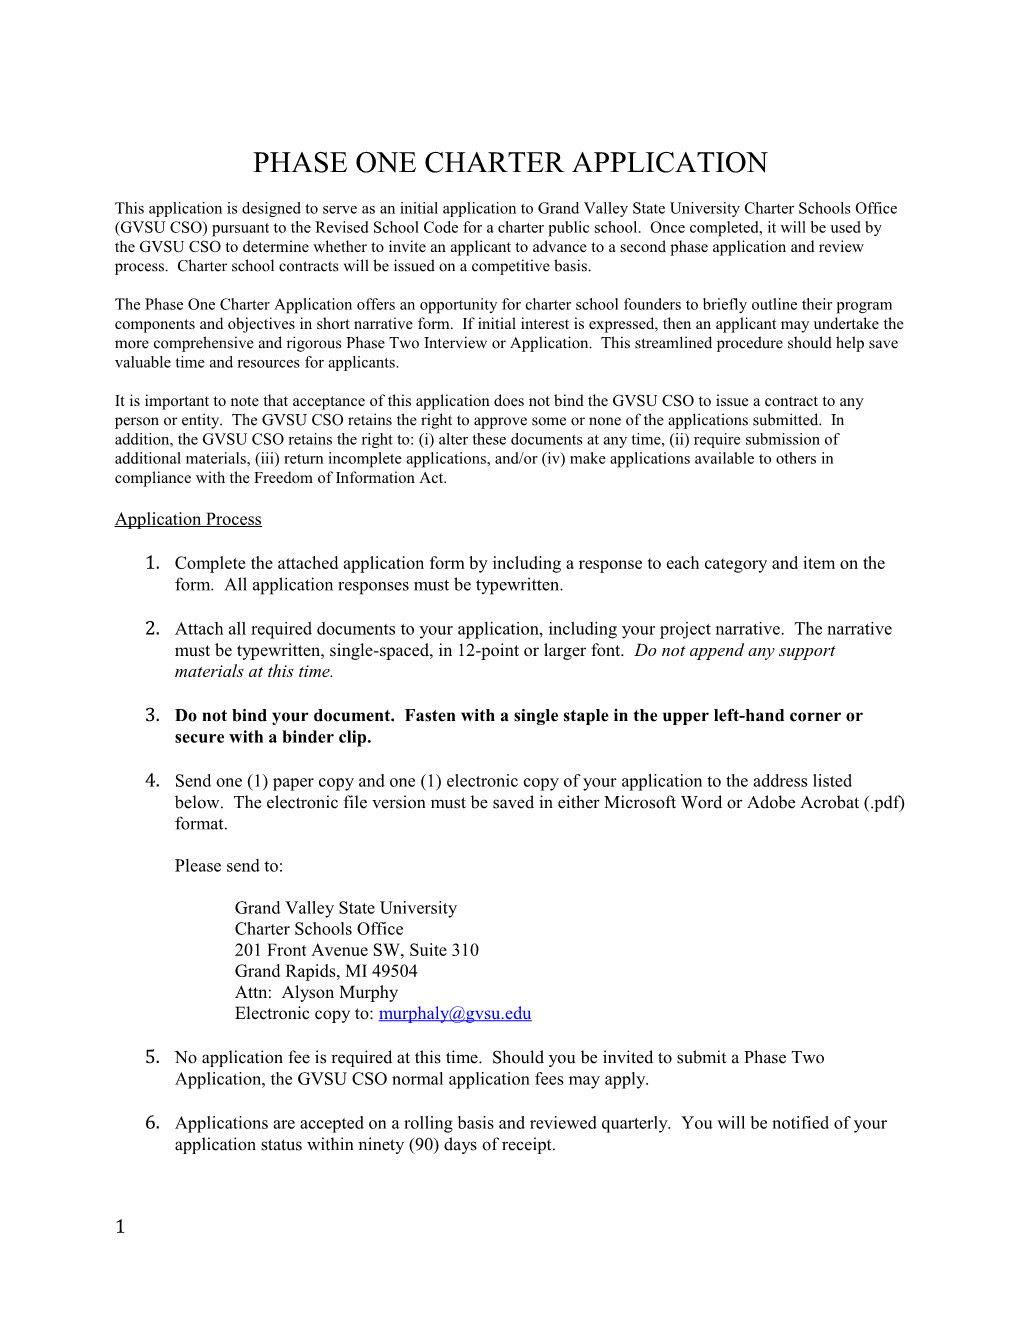 Phase One Charter Application